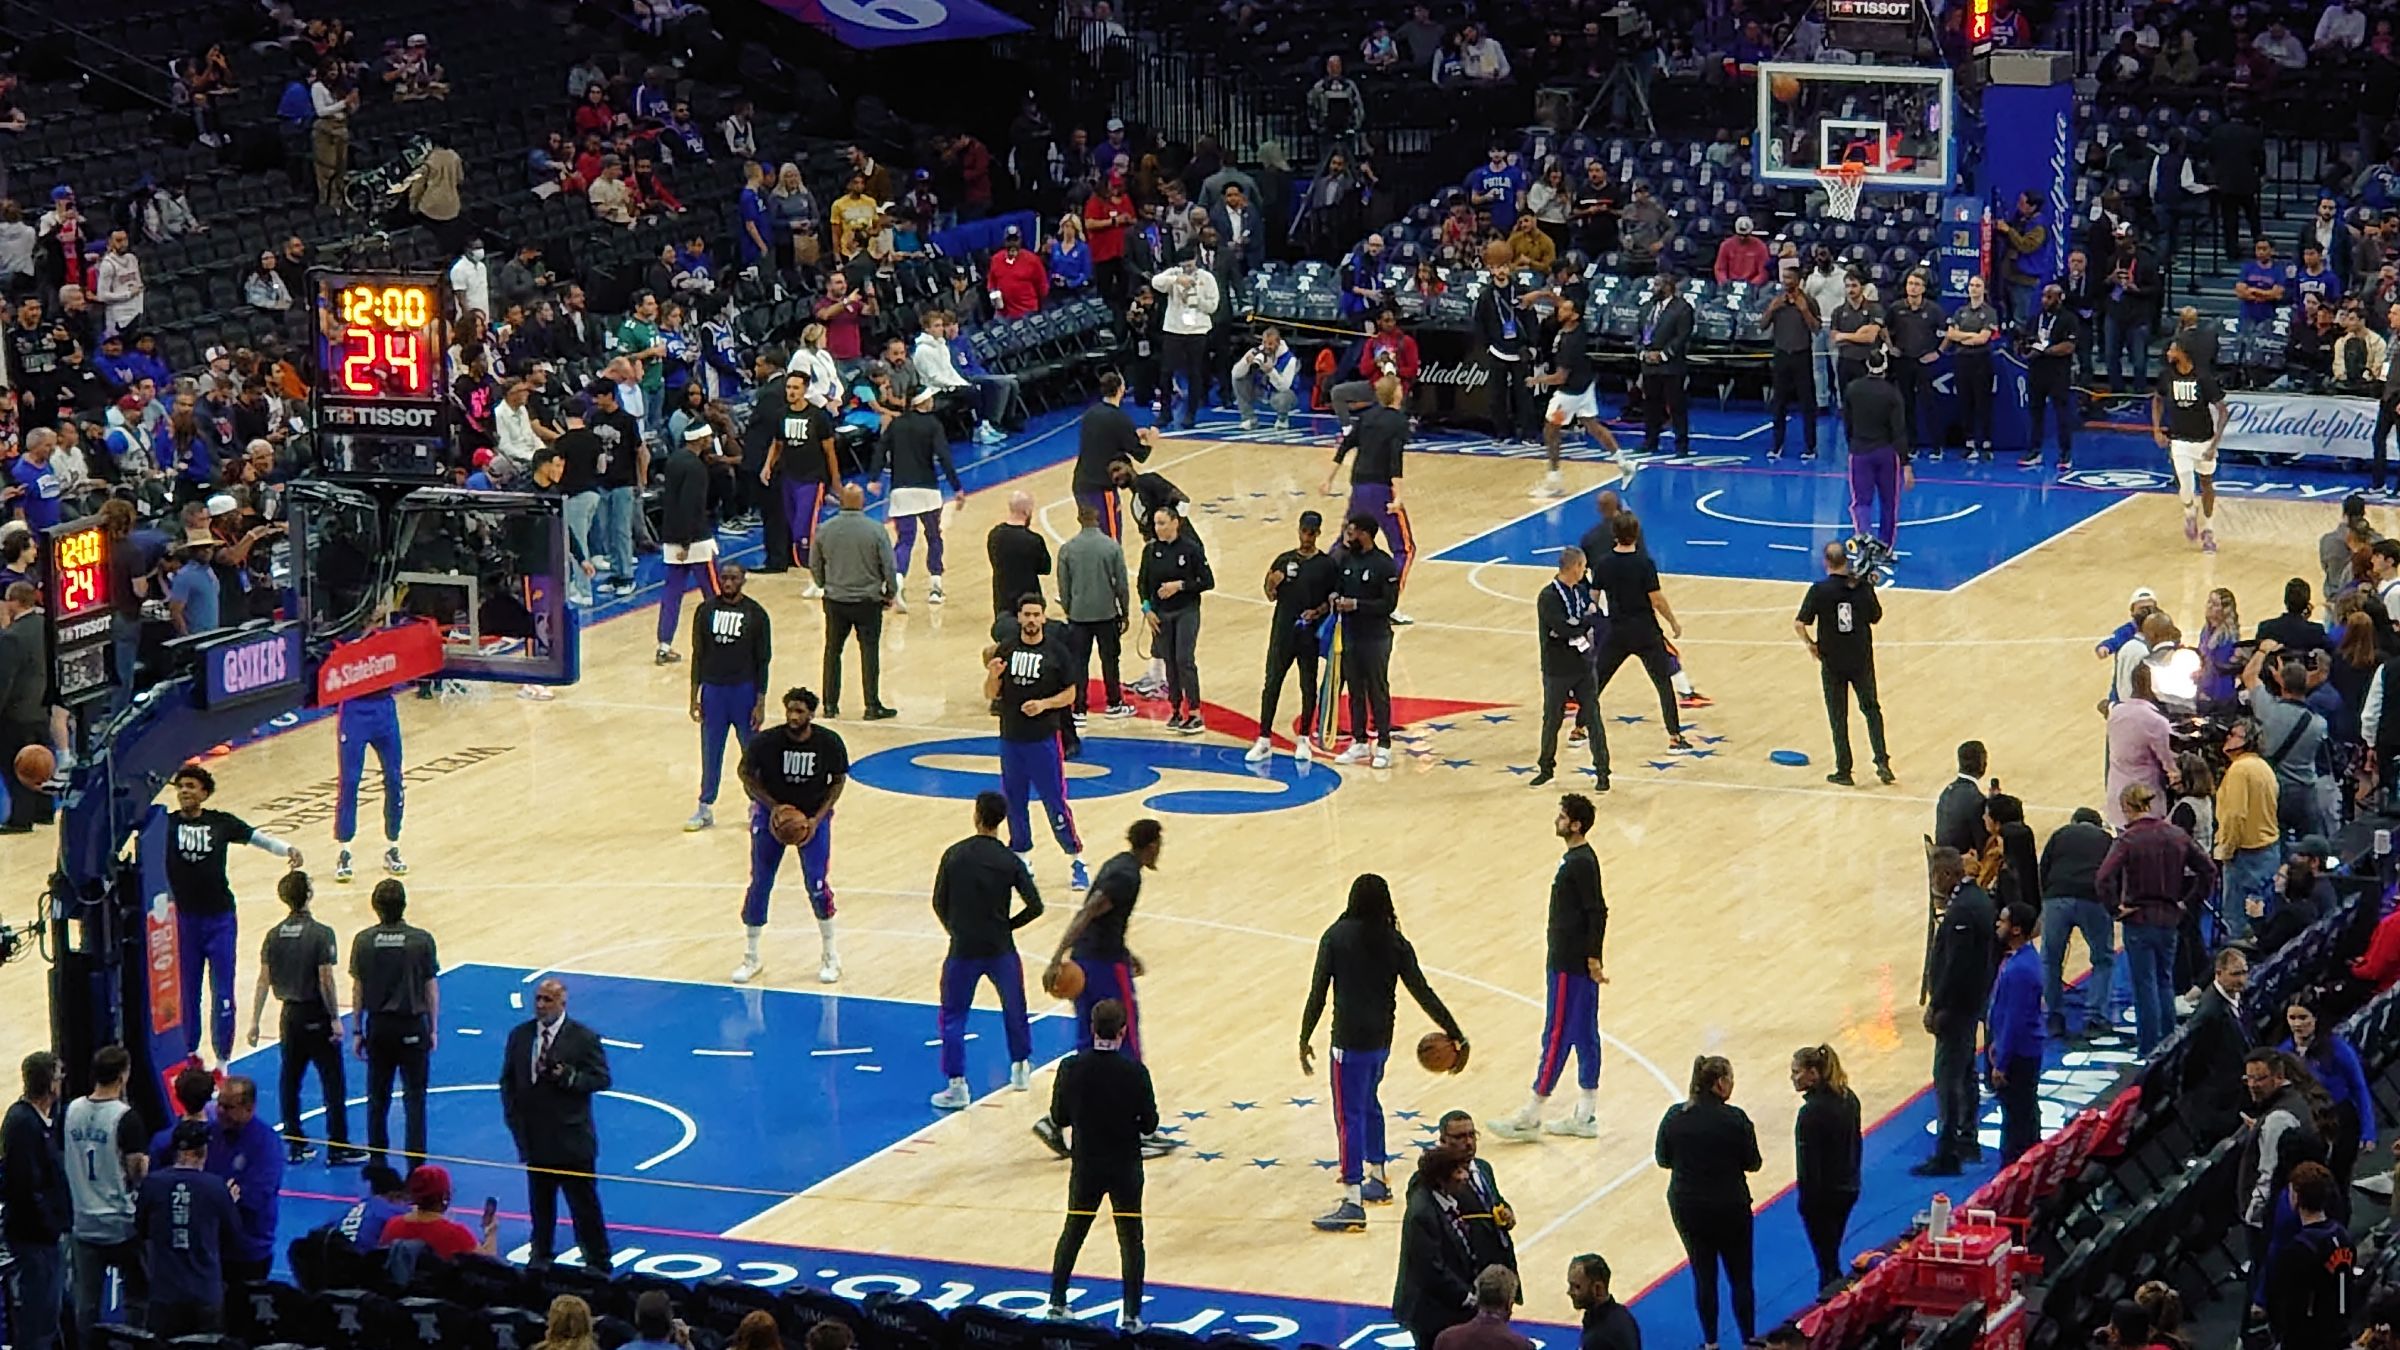 cadillac club 121, row 2 seat view  for basketball - wells fargo center